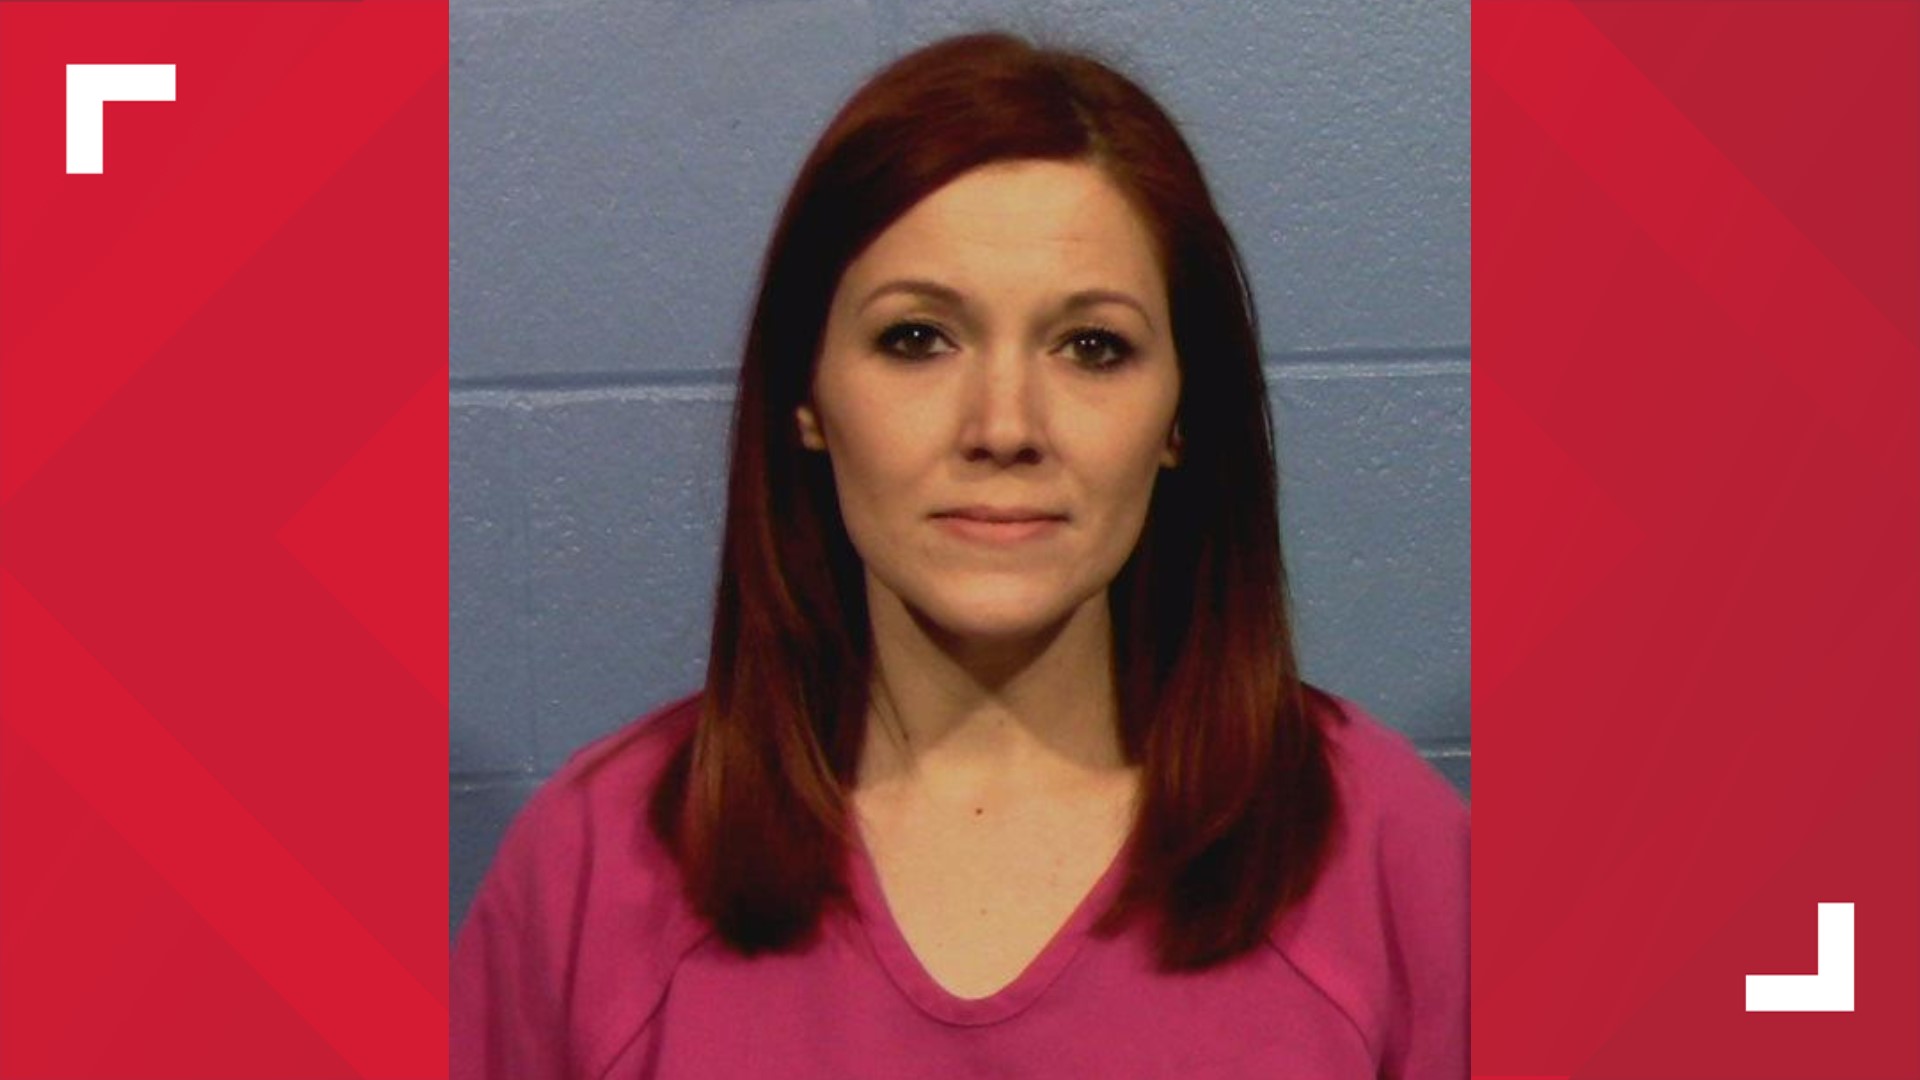 School officials told KVUE that Randi Chaverria, who is now a former teacher for the district, was charged with improper relationship between educator and student.